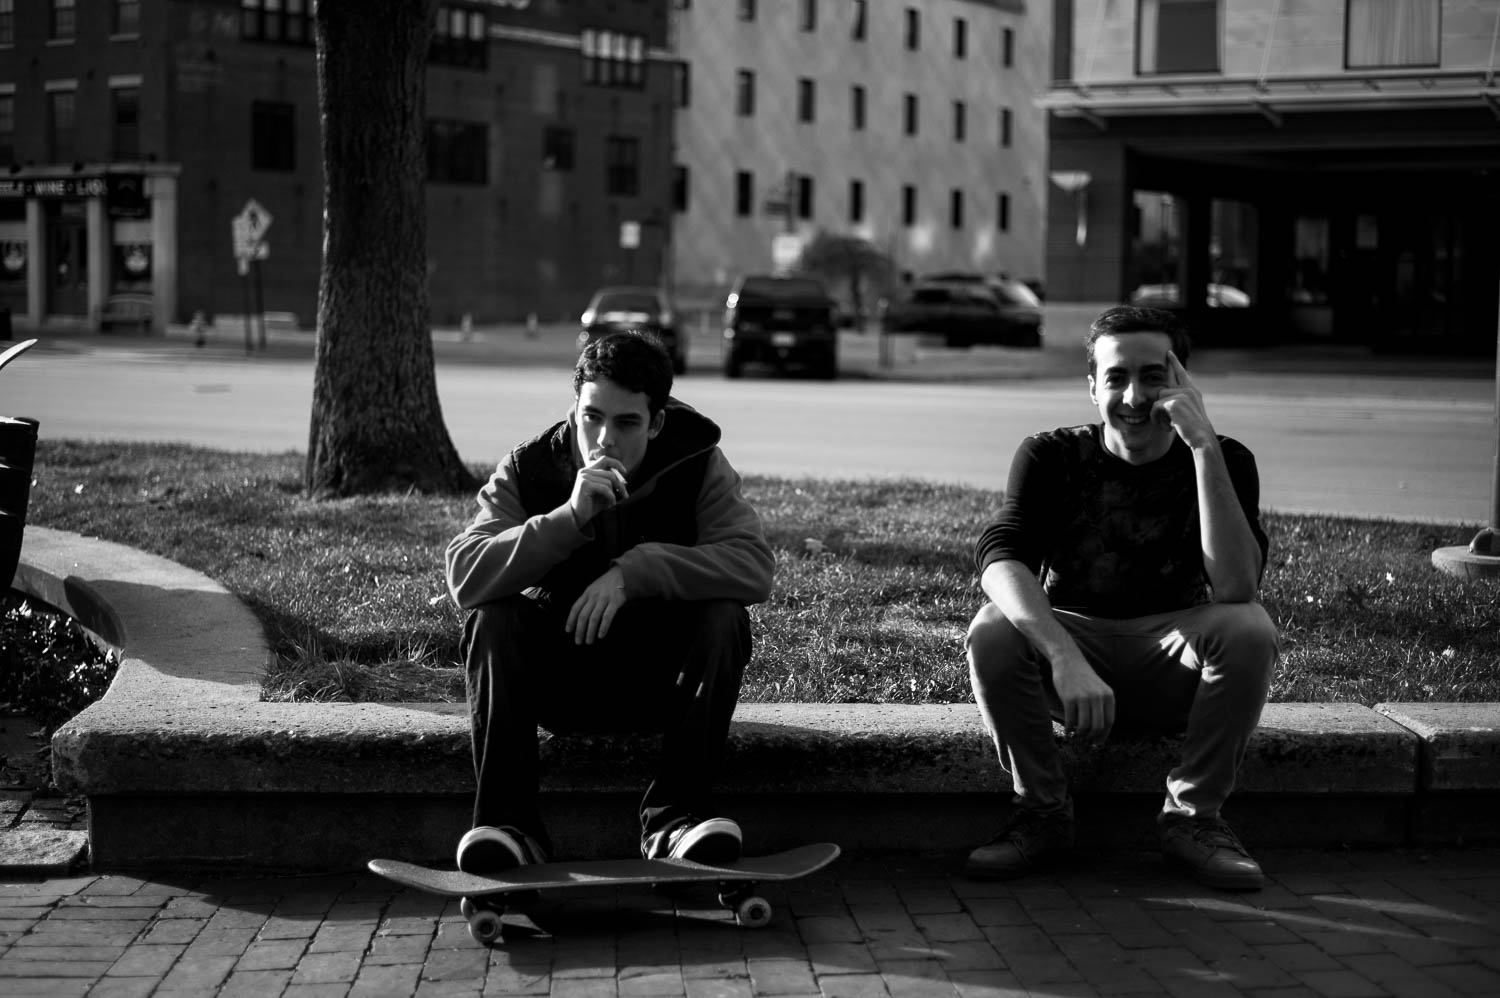 Two skateboarders hanging out and smoking cigarettes